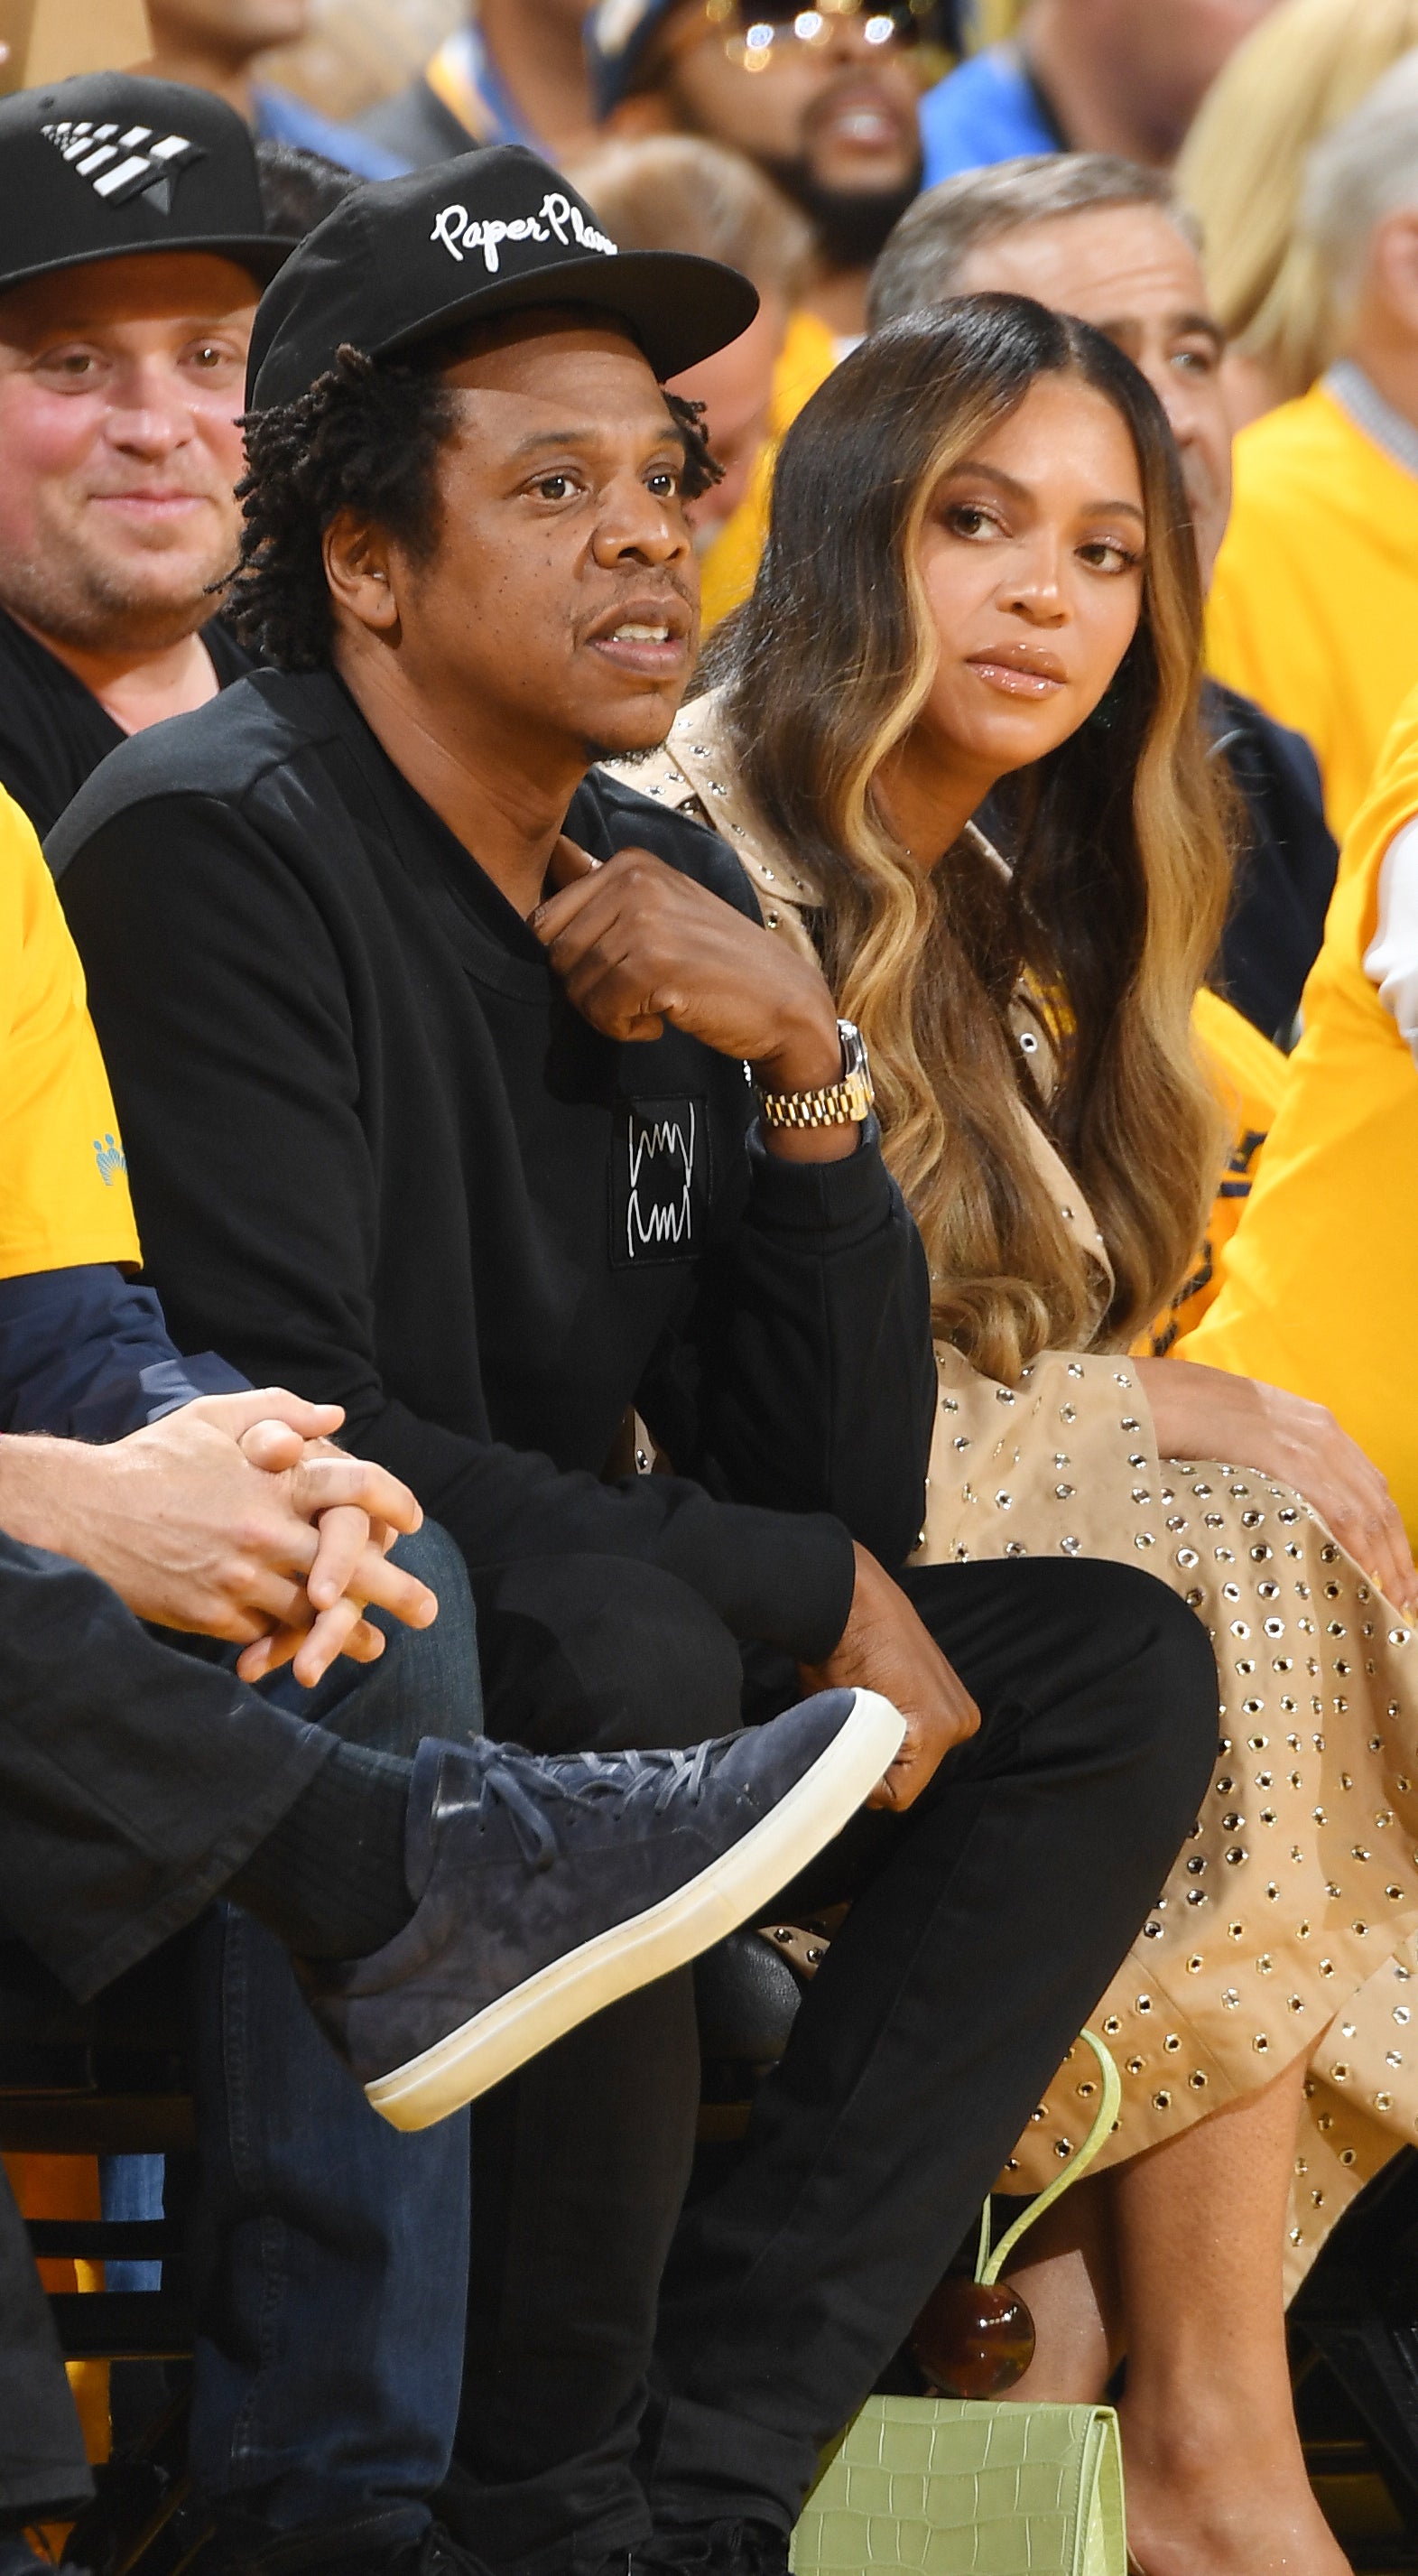 Jay-Z wearing a black sweatshirt and cap seated courtside with Beyoncé in a dotted dress and heels